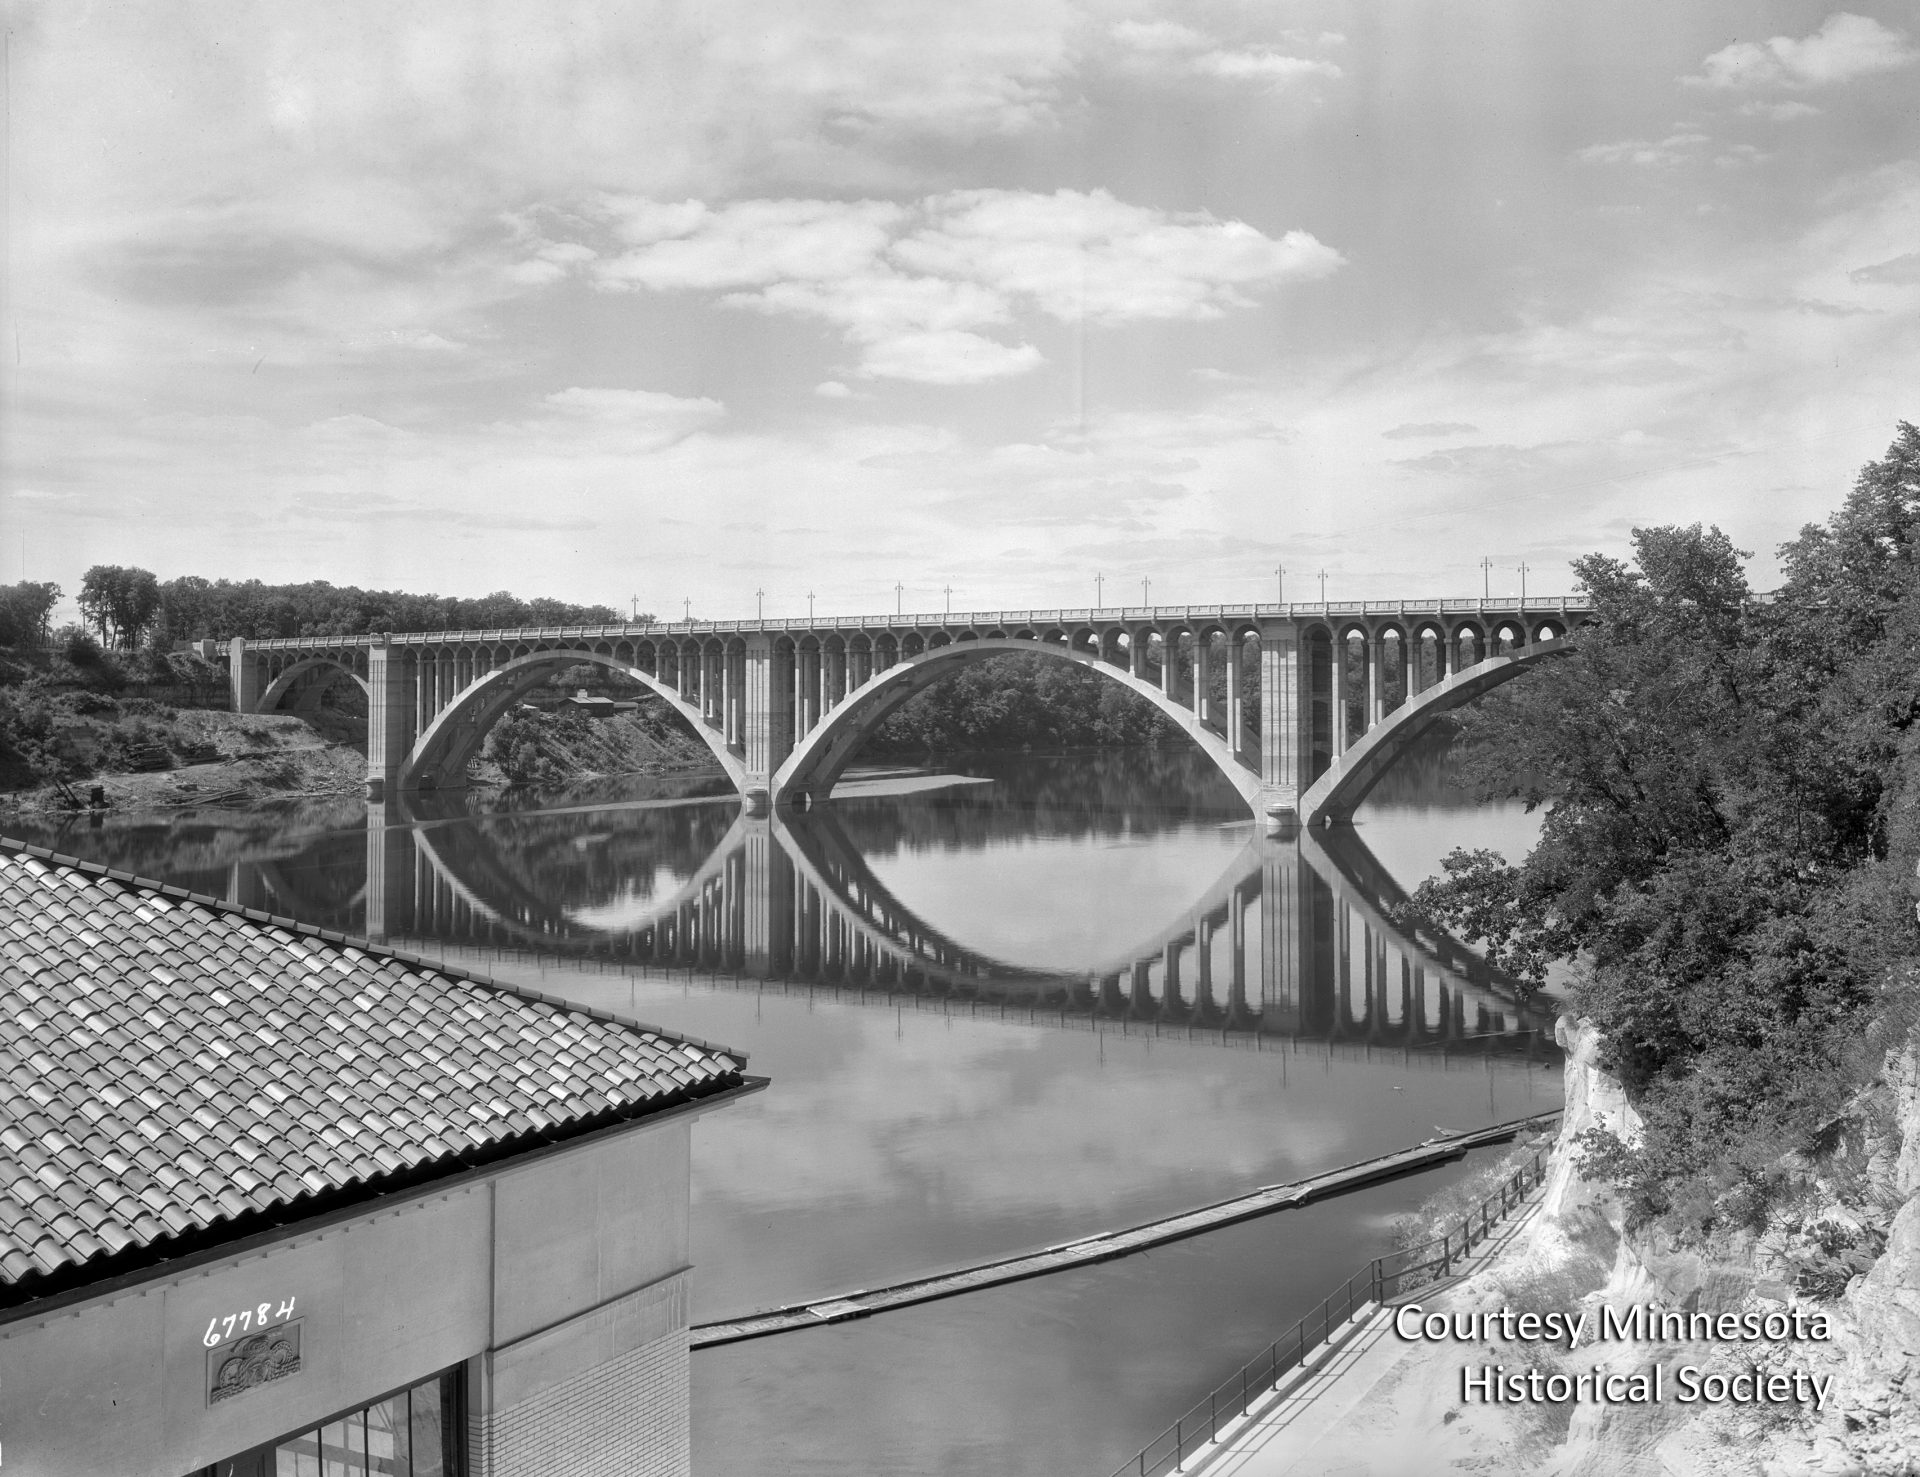 The Intercity Bridge, better known as the Ford Bridge, was completed in 1927, connecting the growing Longfellow neighborhood of Minneapolis to the area around the new Ford plant. Courtesy Minnesota Historical Society